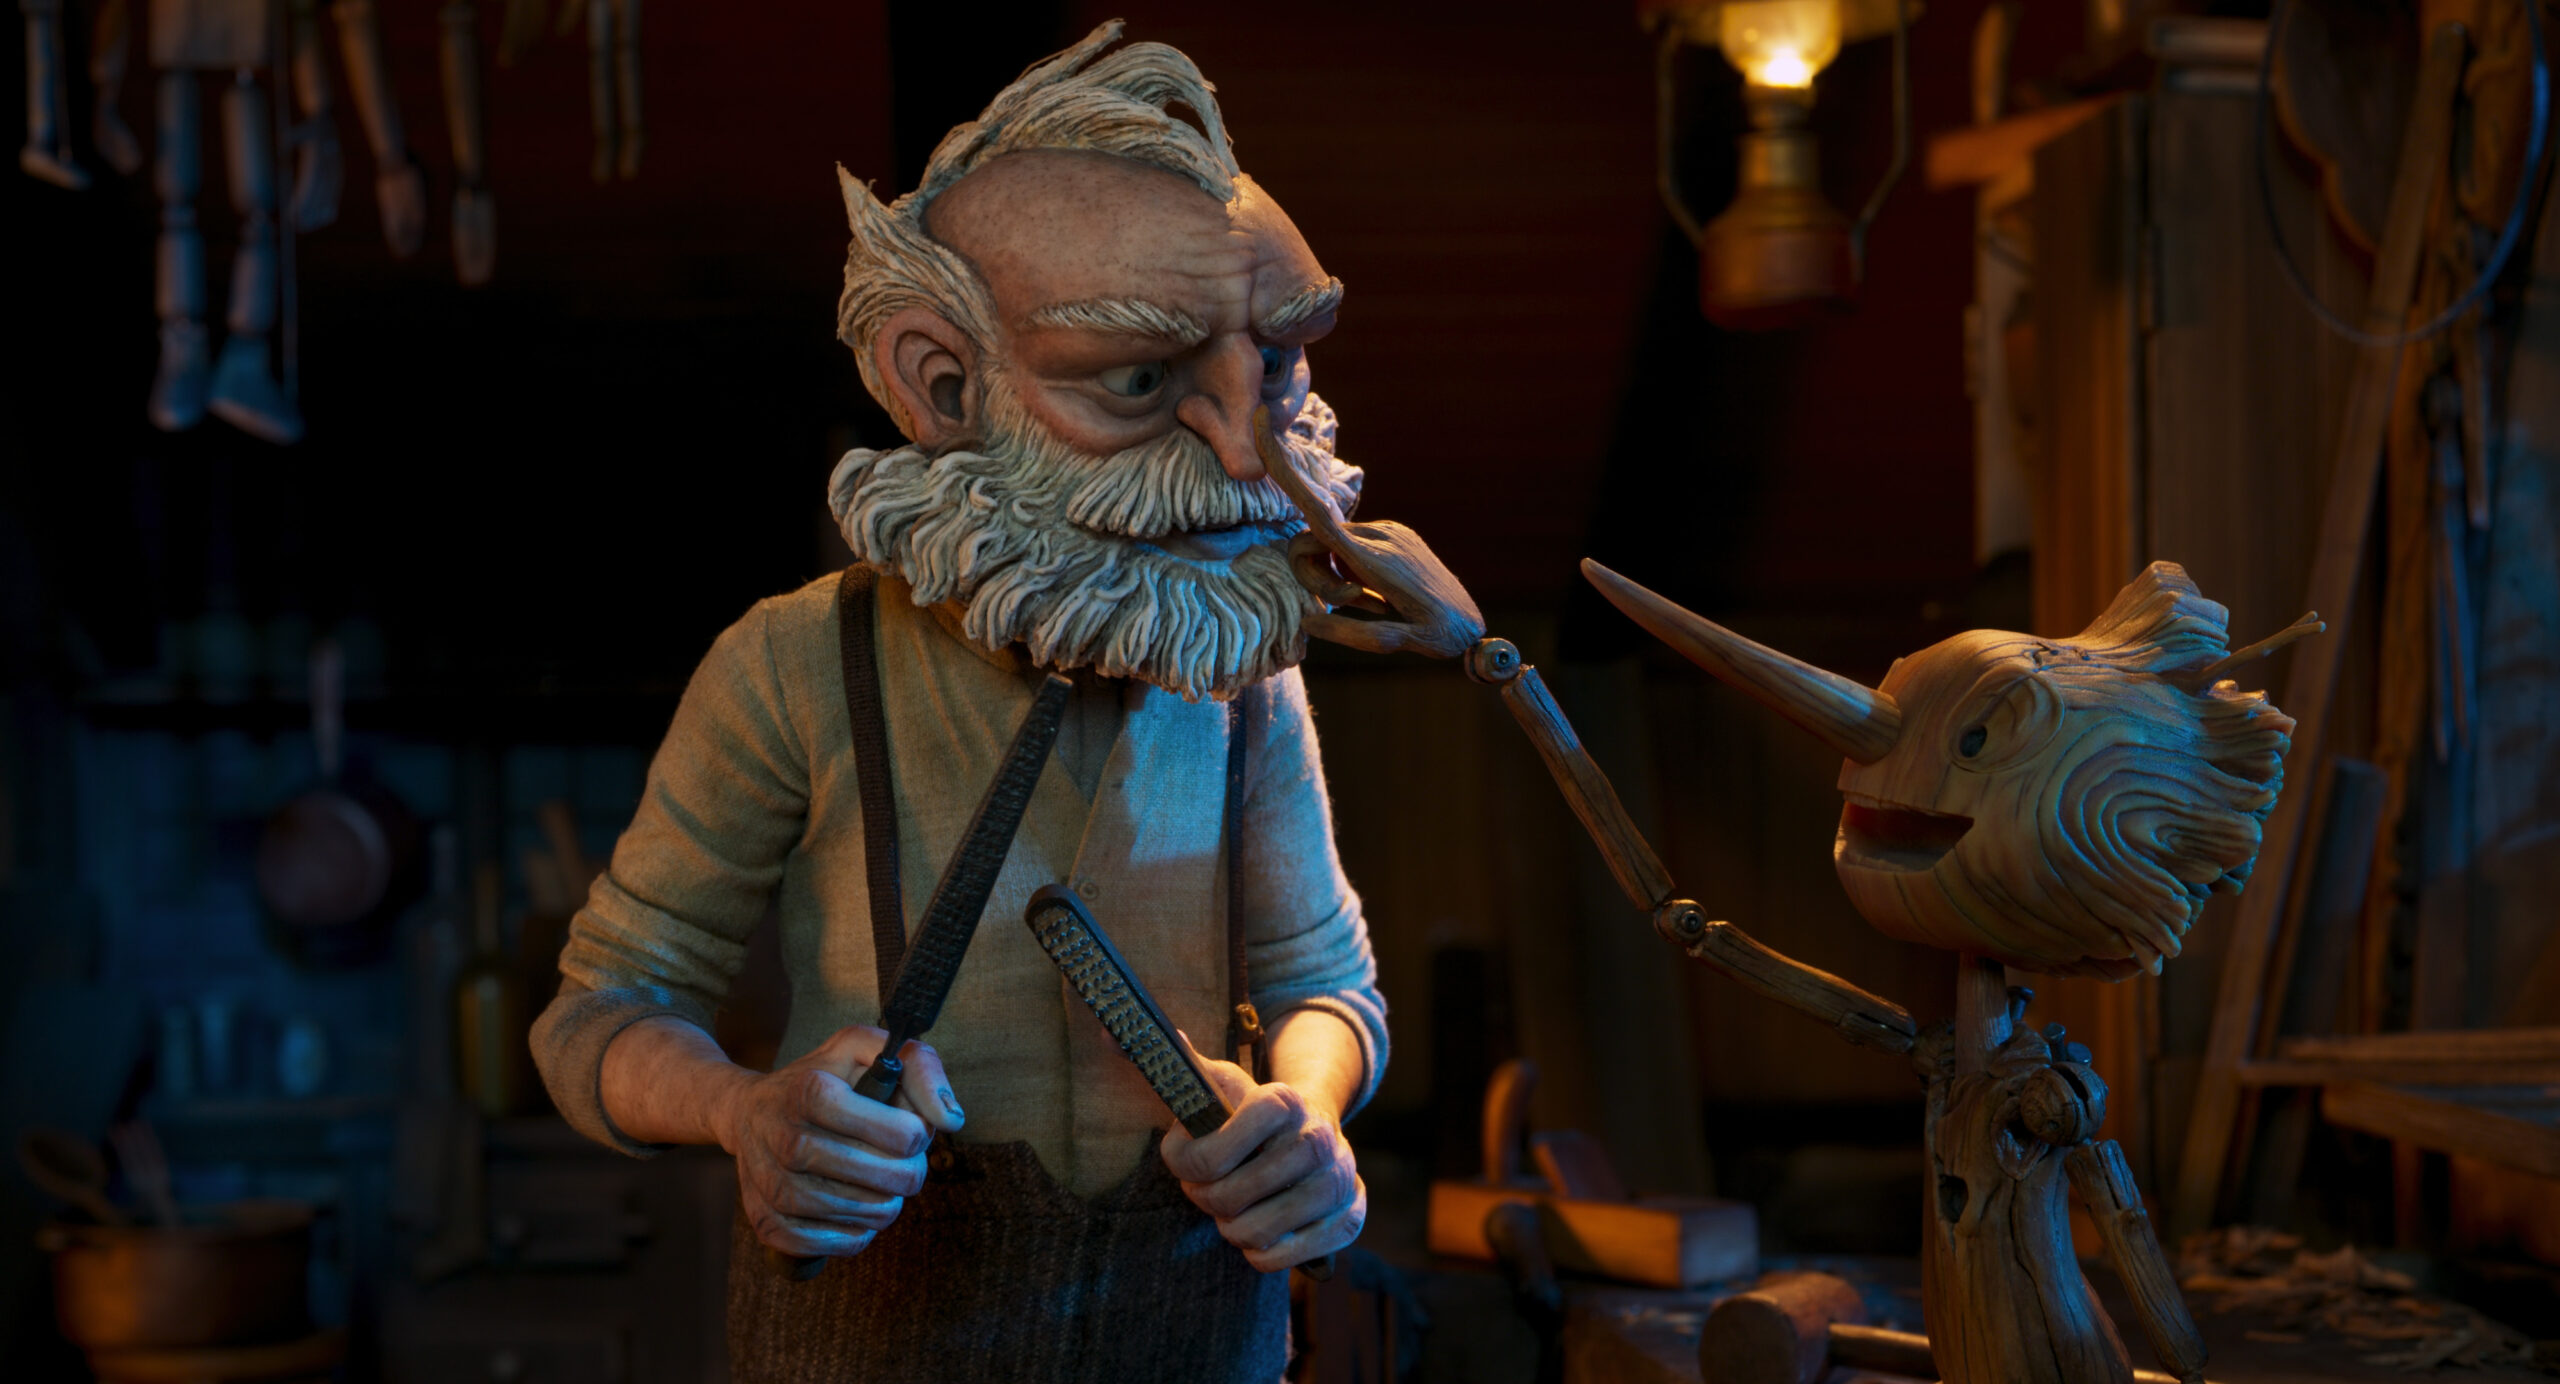 Guillermo del Toro’s Pinocchio Pushes Animation Into A New Direction